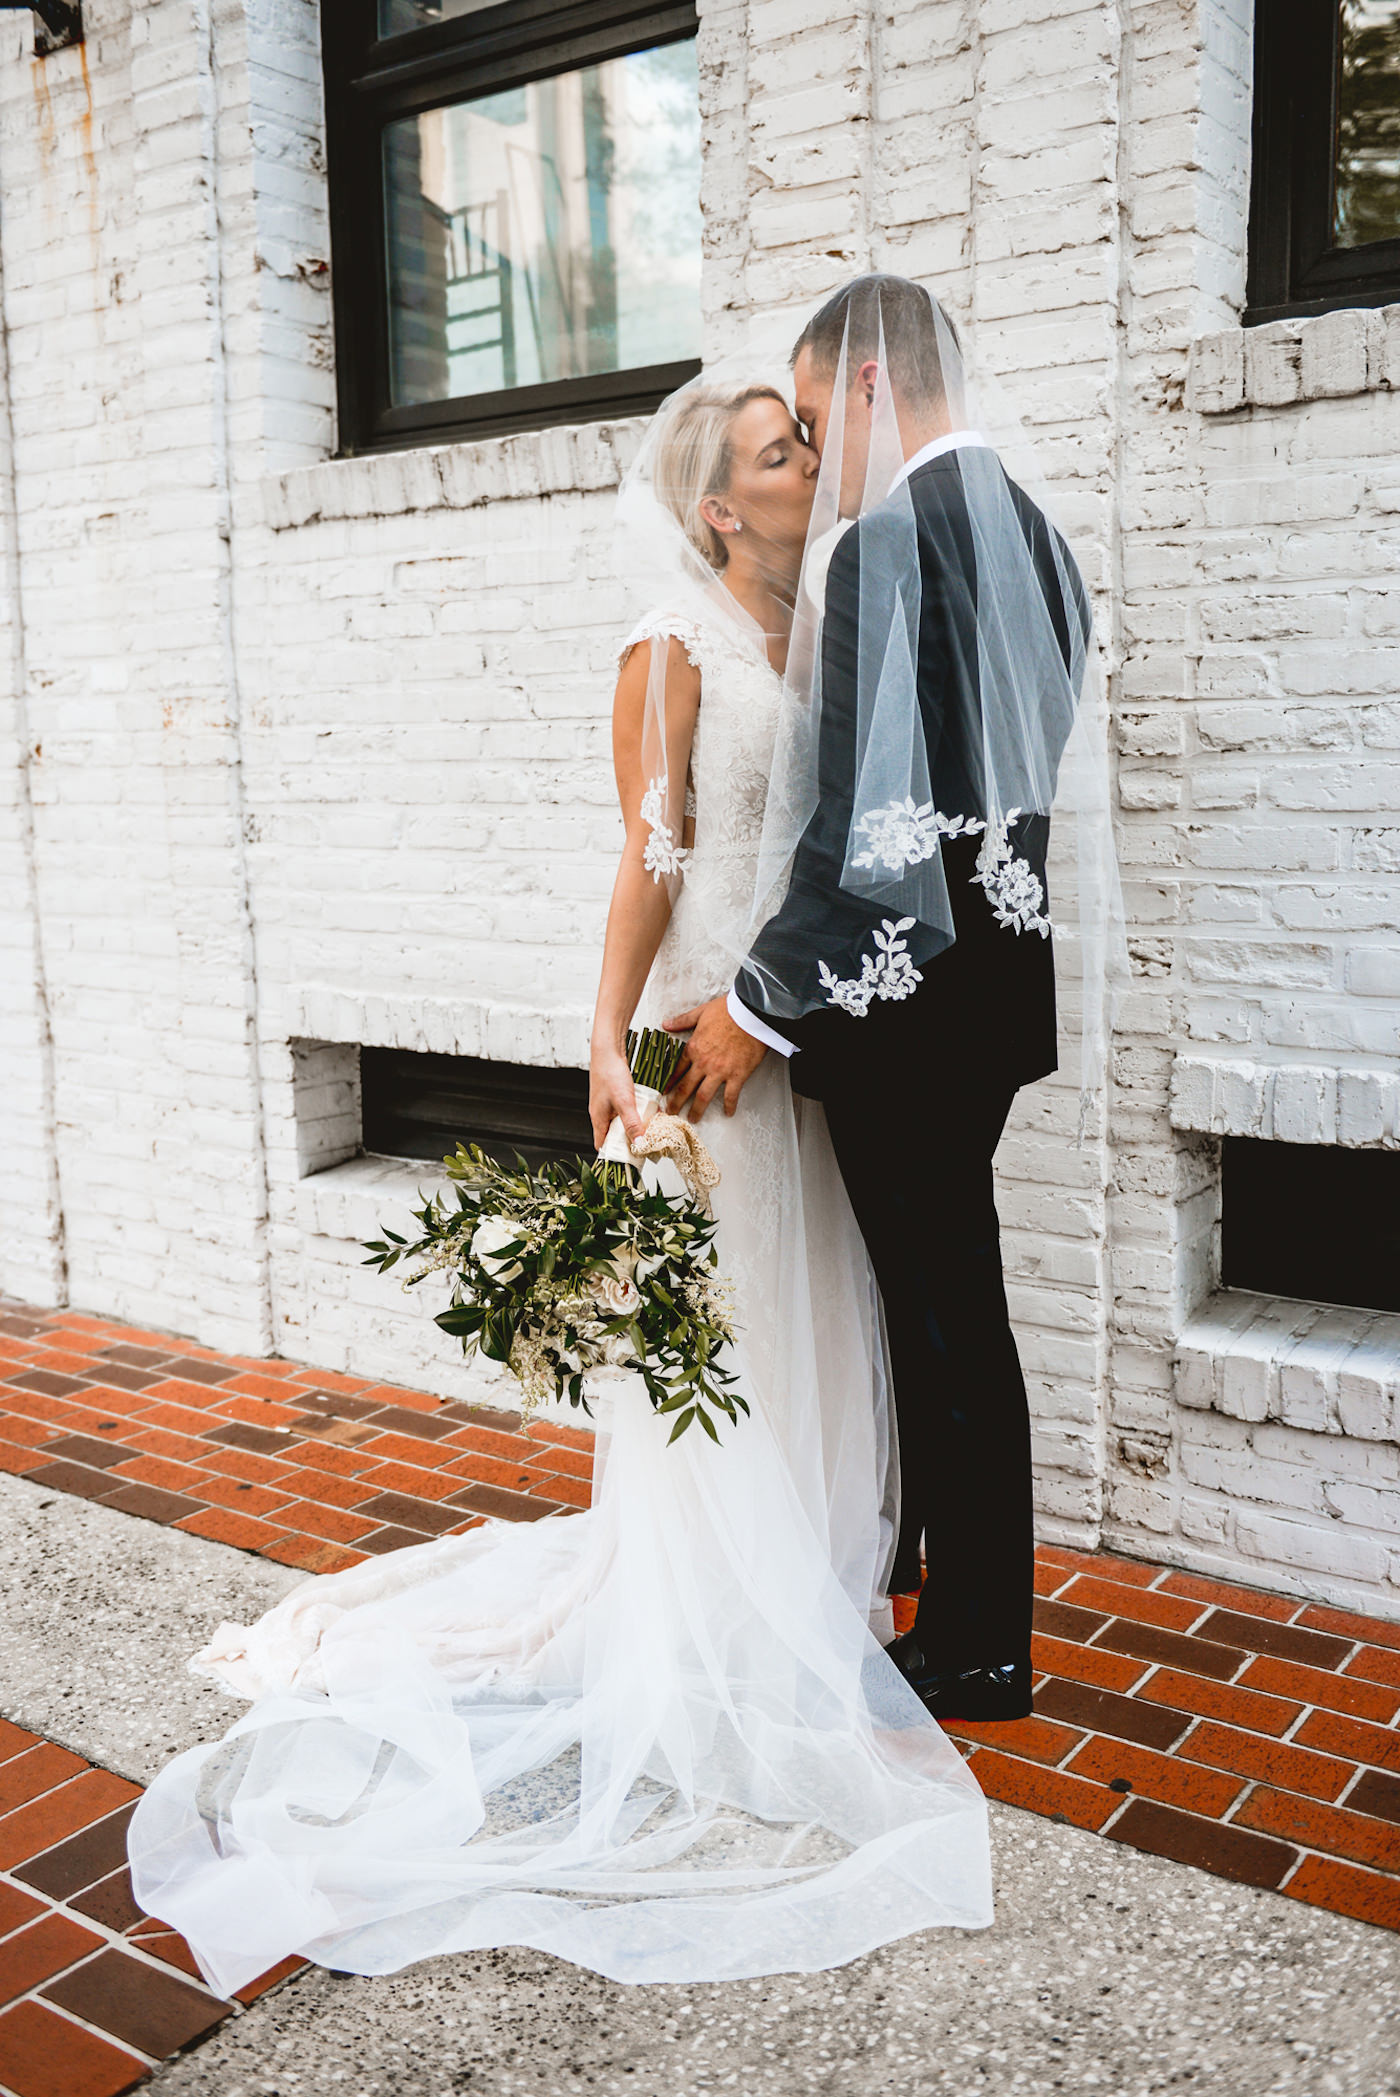 Ivory Morilee Lace and Tulle A Line Bridal Gown with Illusion Lace Cap Sleeve and Cathedral Veil | Groom in Classic Black Tuxedo Suit | Natural Neutral Wedding Bridal Bouquet with White Roses and Ivory Spray Tea Roses and Astilbe Accented with Olive Leaf Greenery